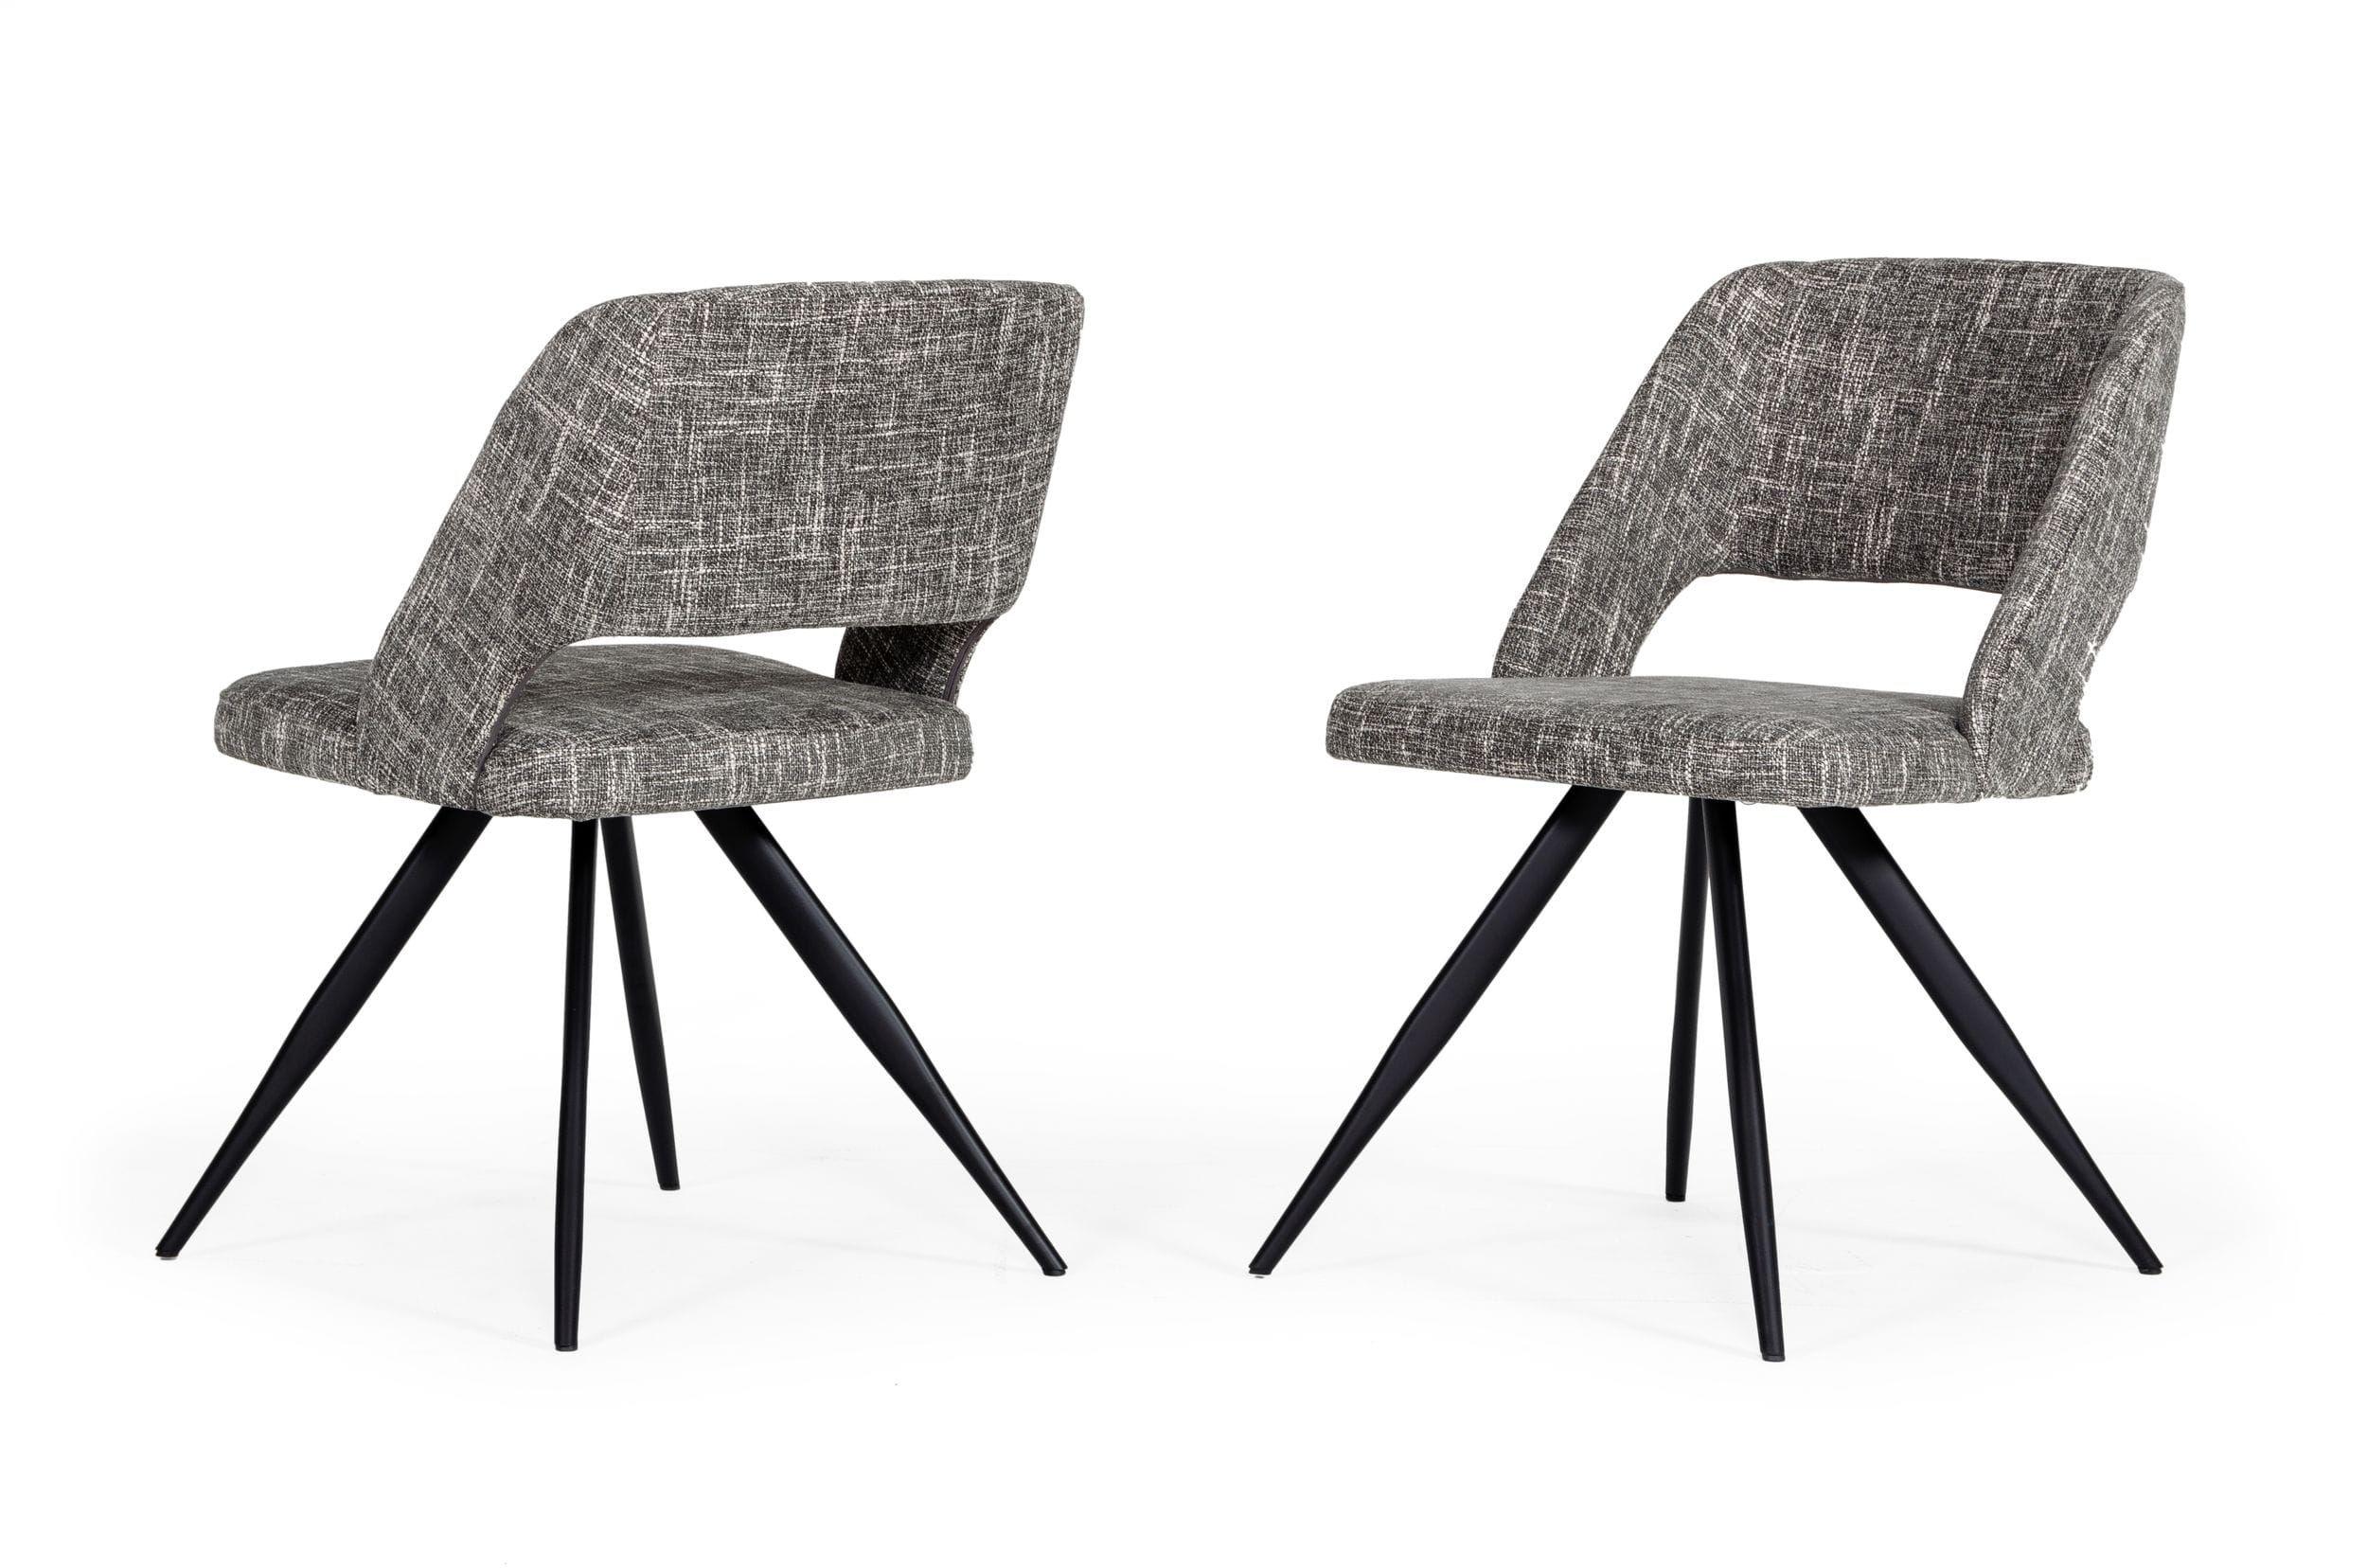 Contemporary, Modern Dining Chair Set Palmer VGEWF3207AC-GRY-2pcs in Gray Fabric